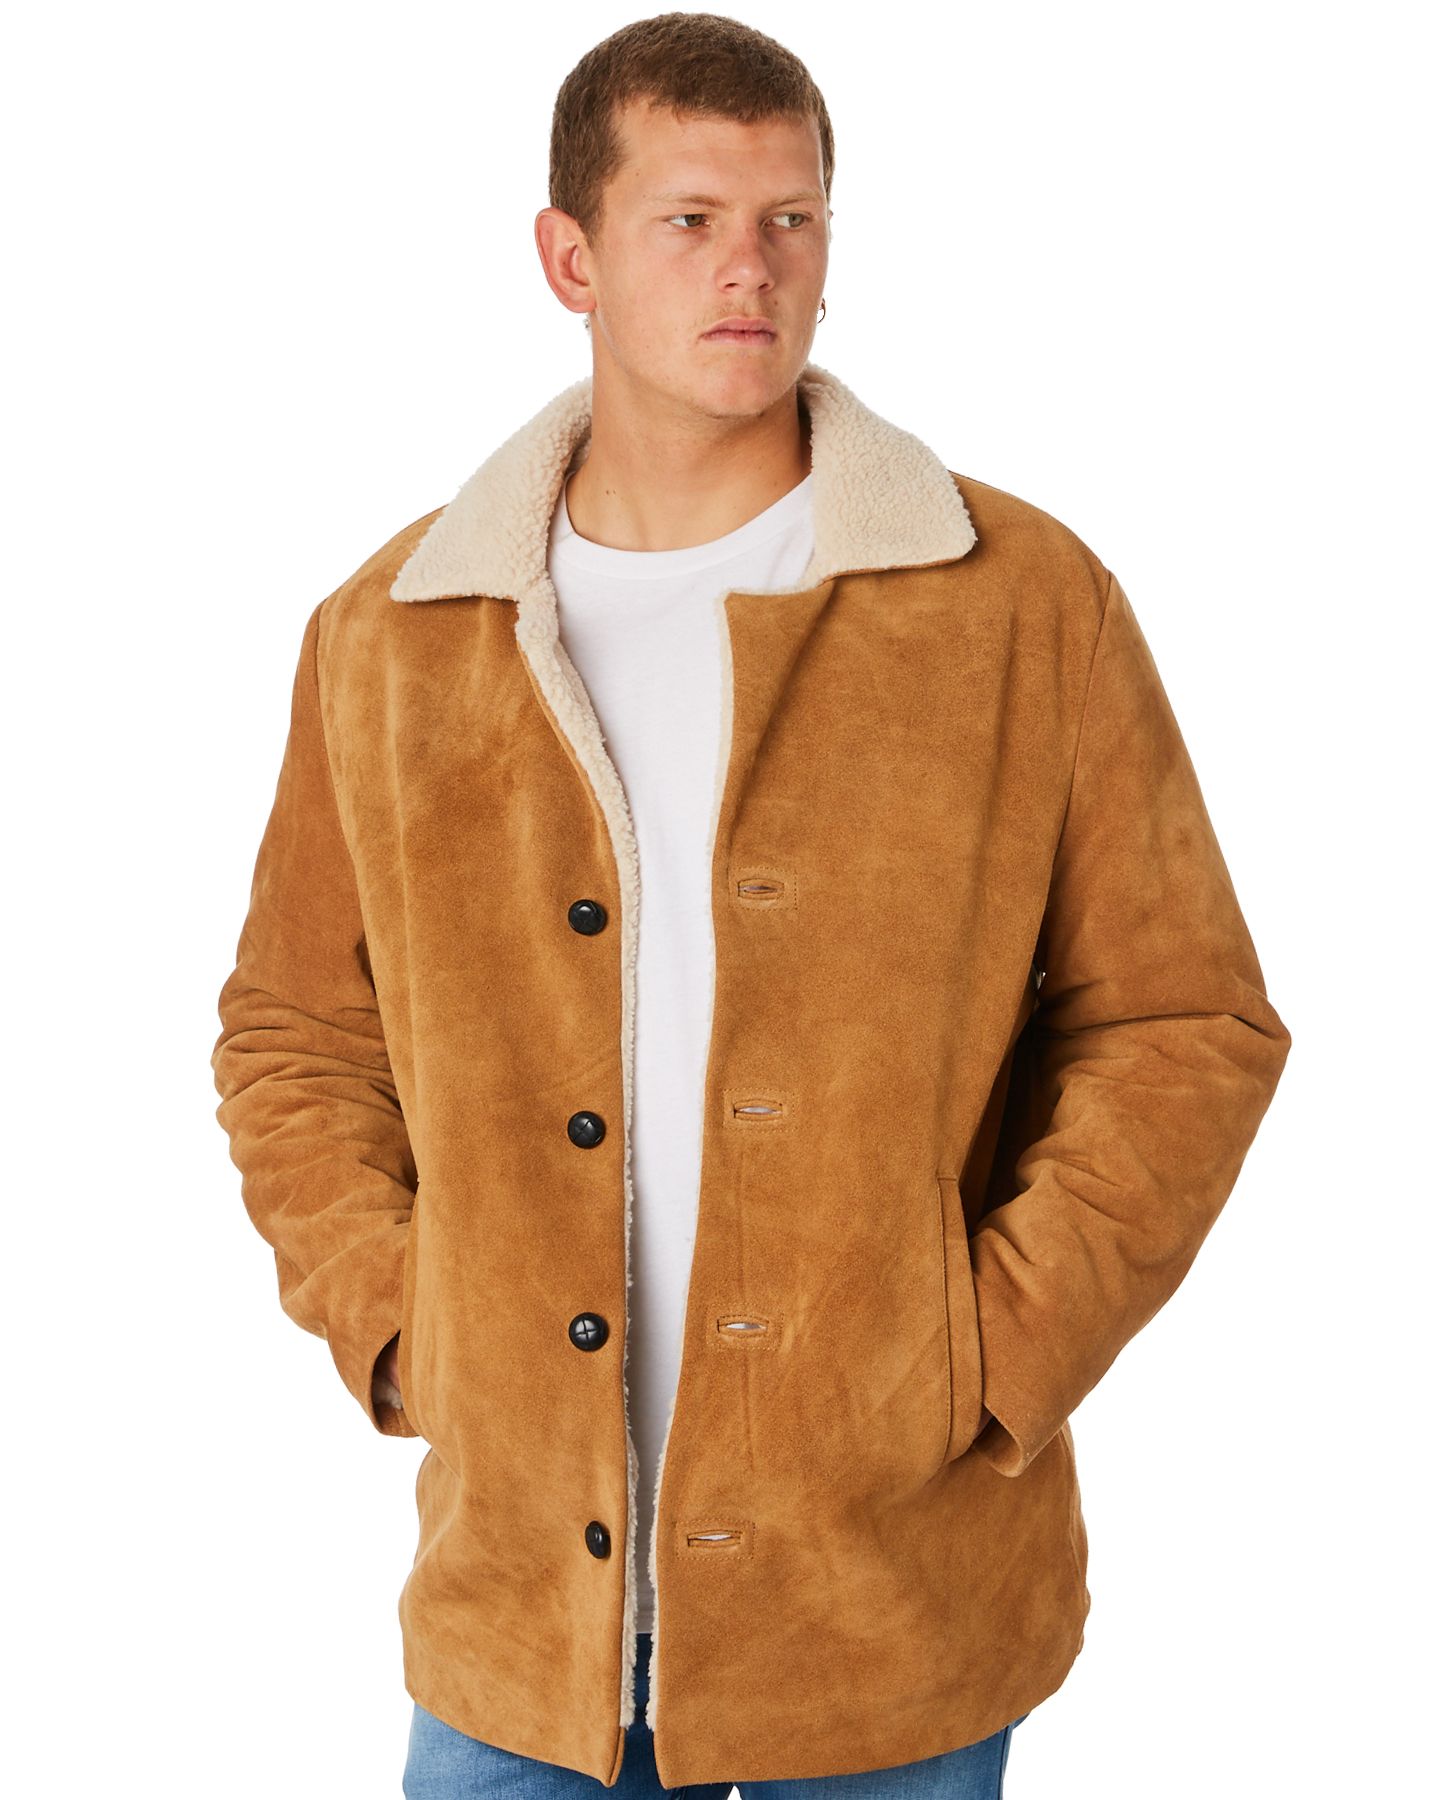 Rollas Old Mate Classic Mens Sherpa Jacket - Tan Suede | SurfStitch